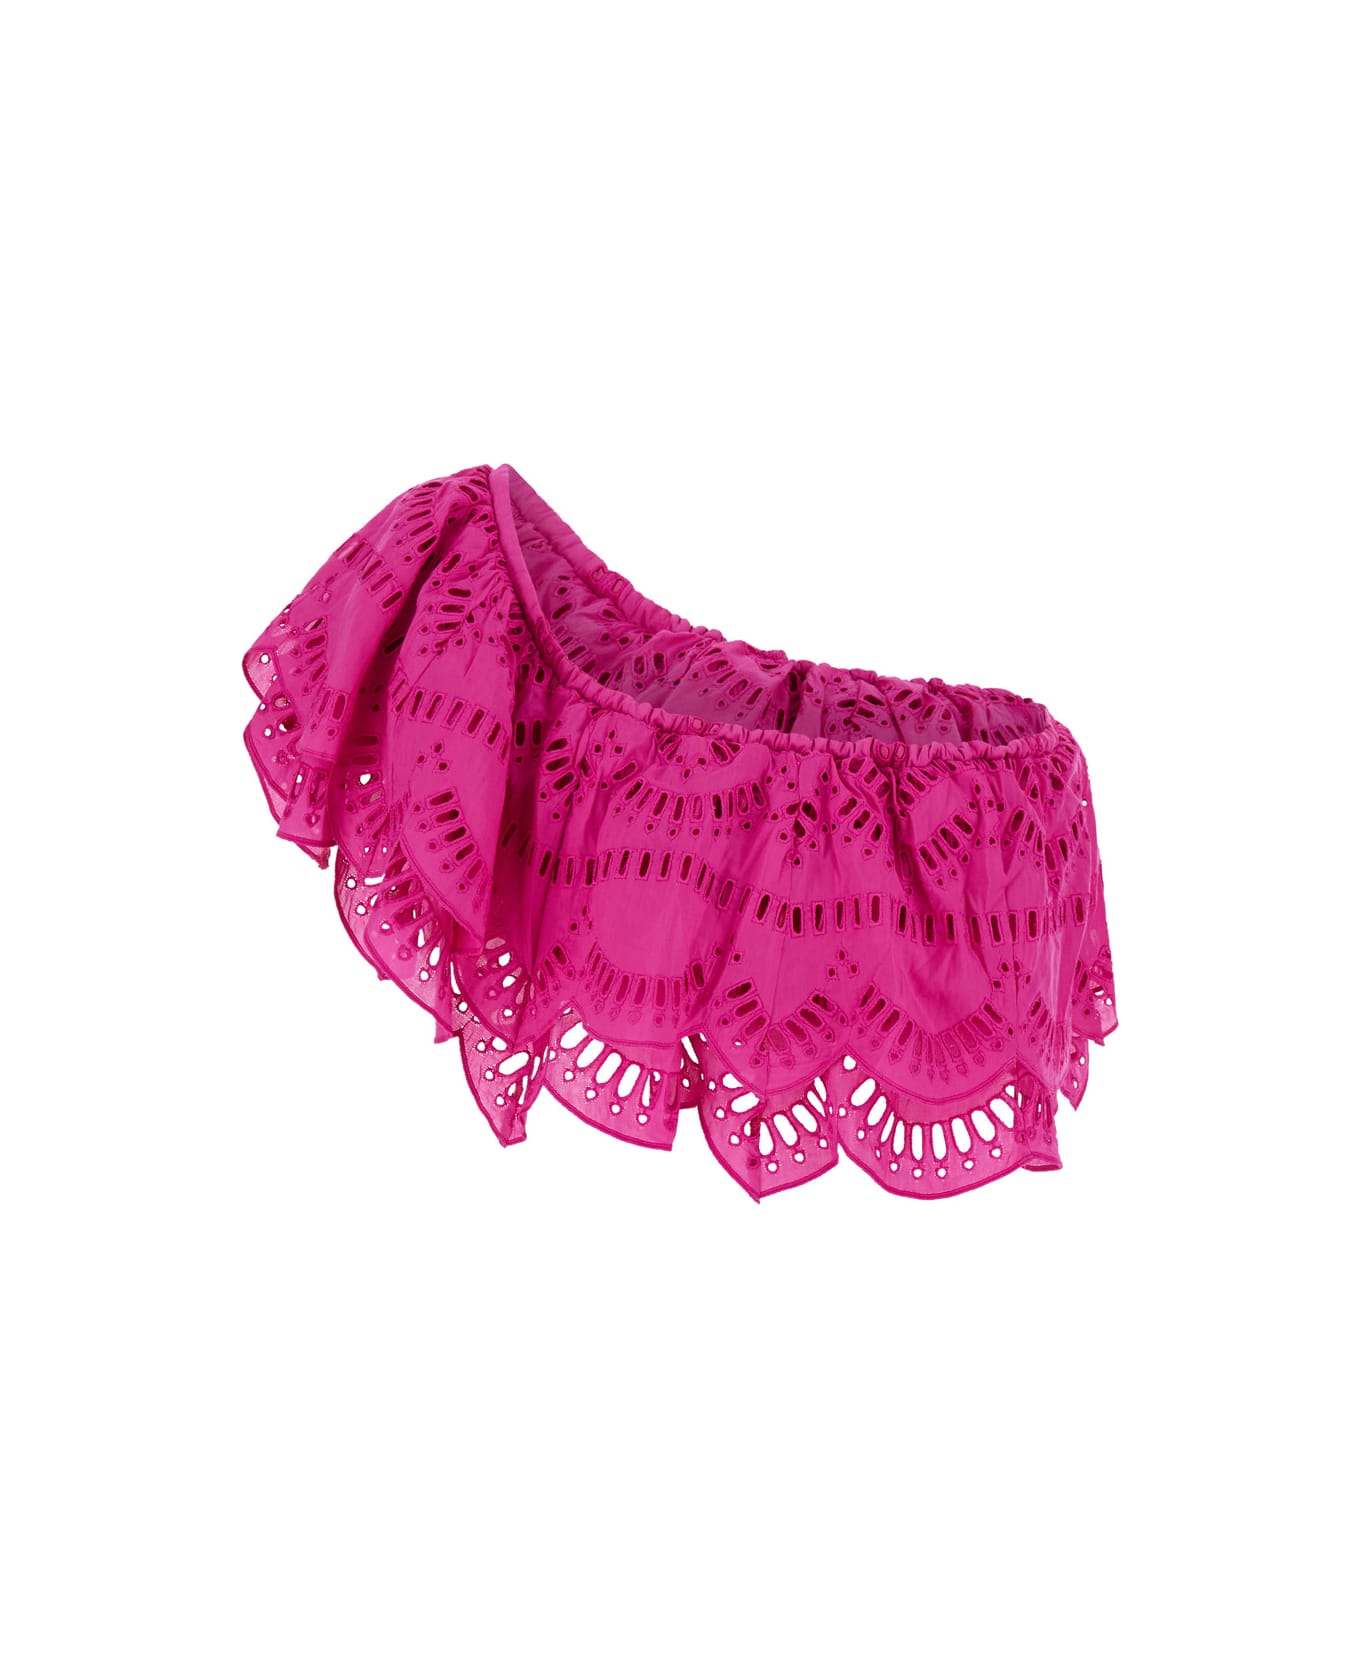 Charo Ruiz Fuchsia One-shoulder Top With Crochet Work In Cotton Blend Woman - Pink トップス